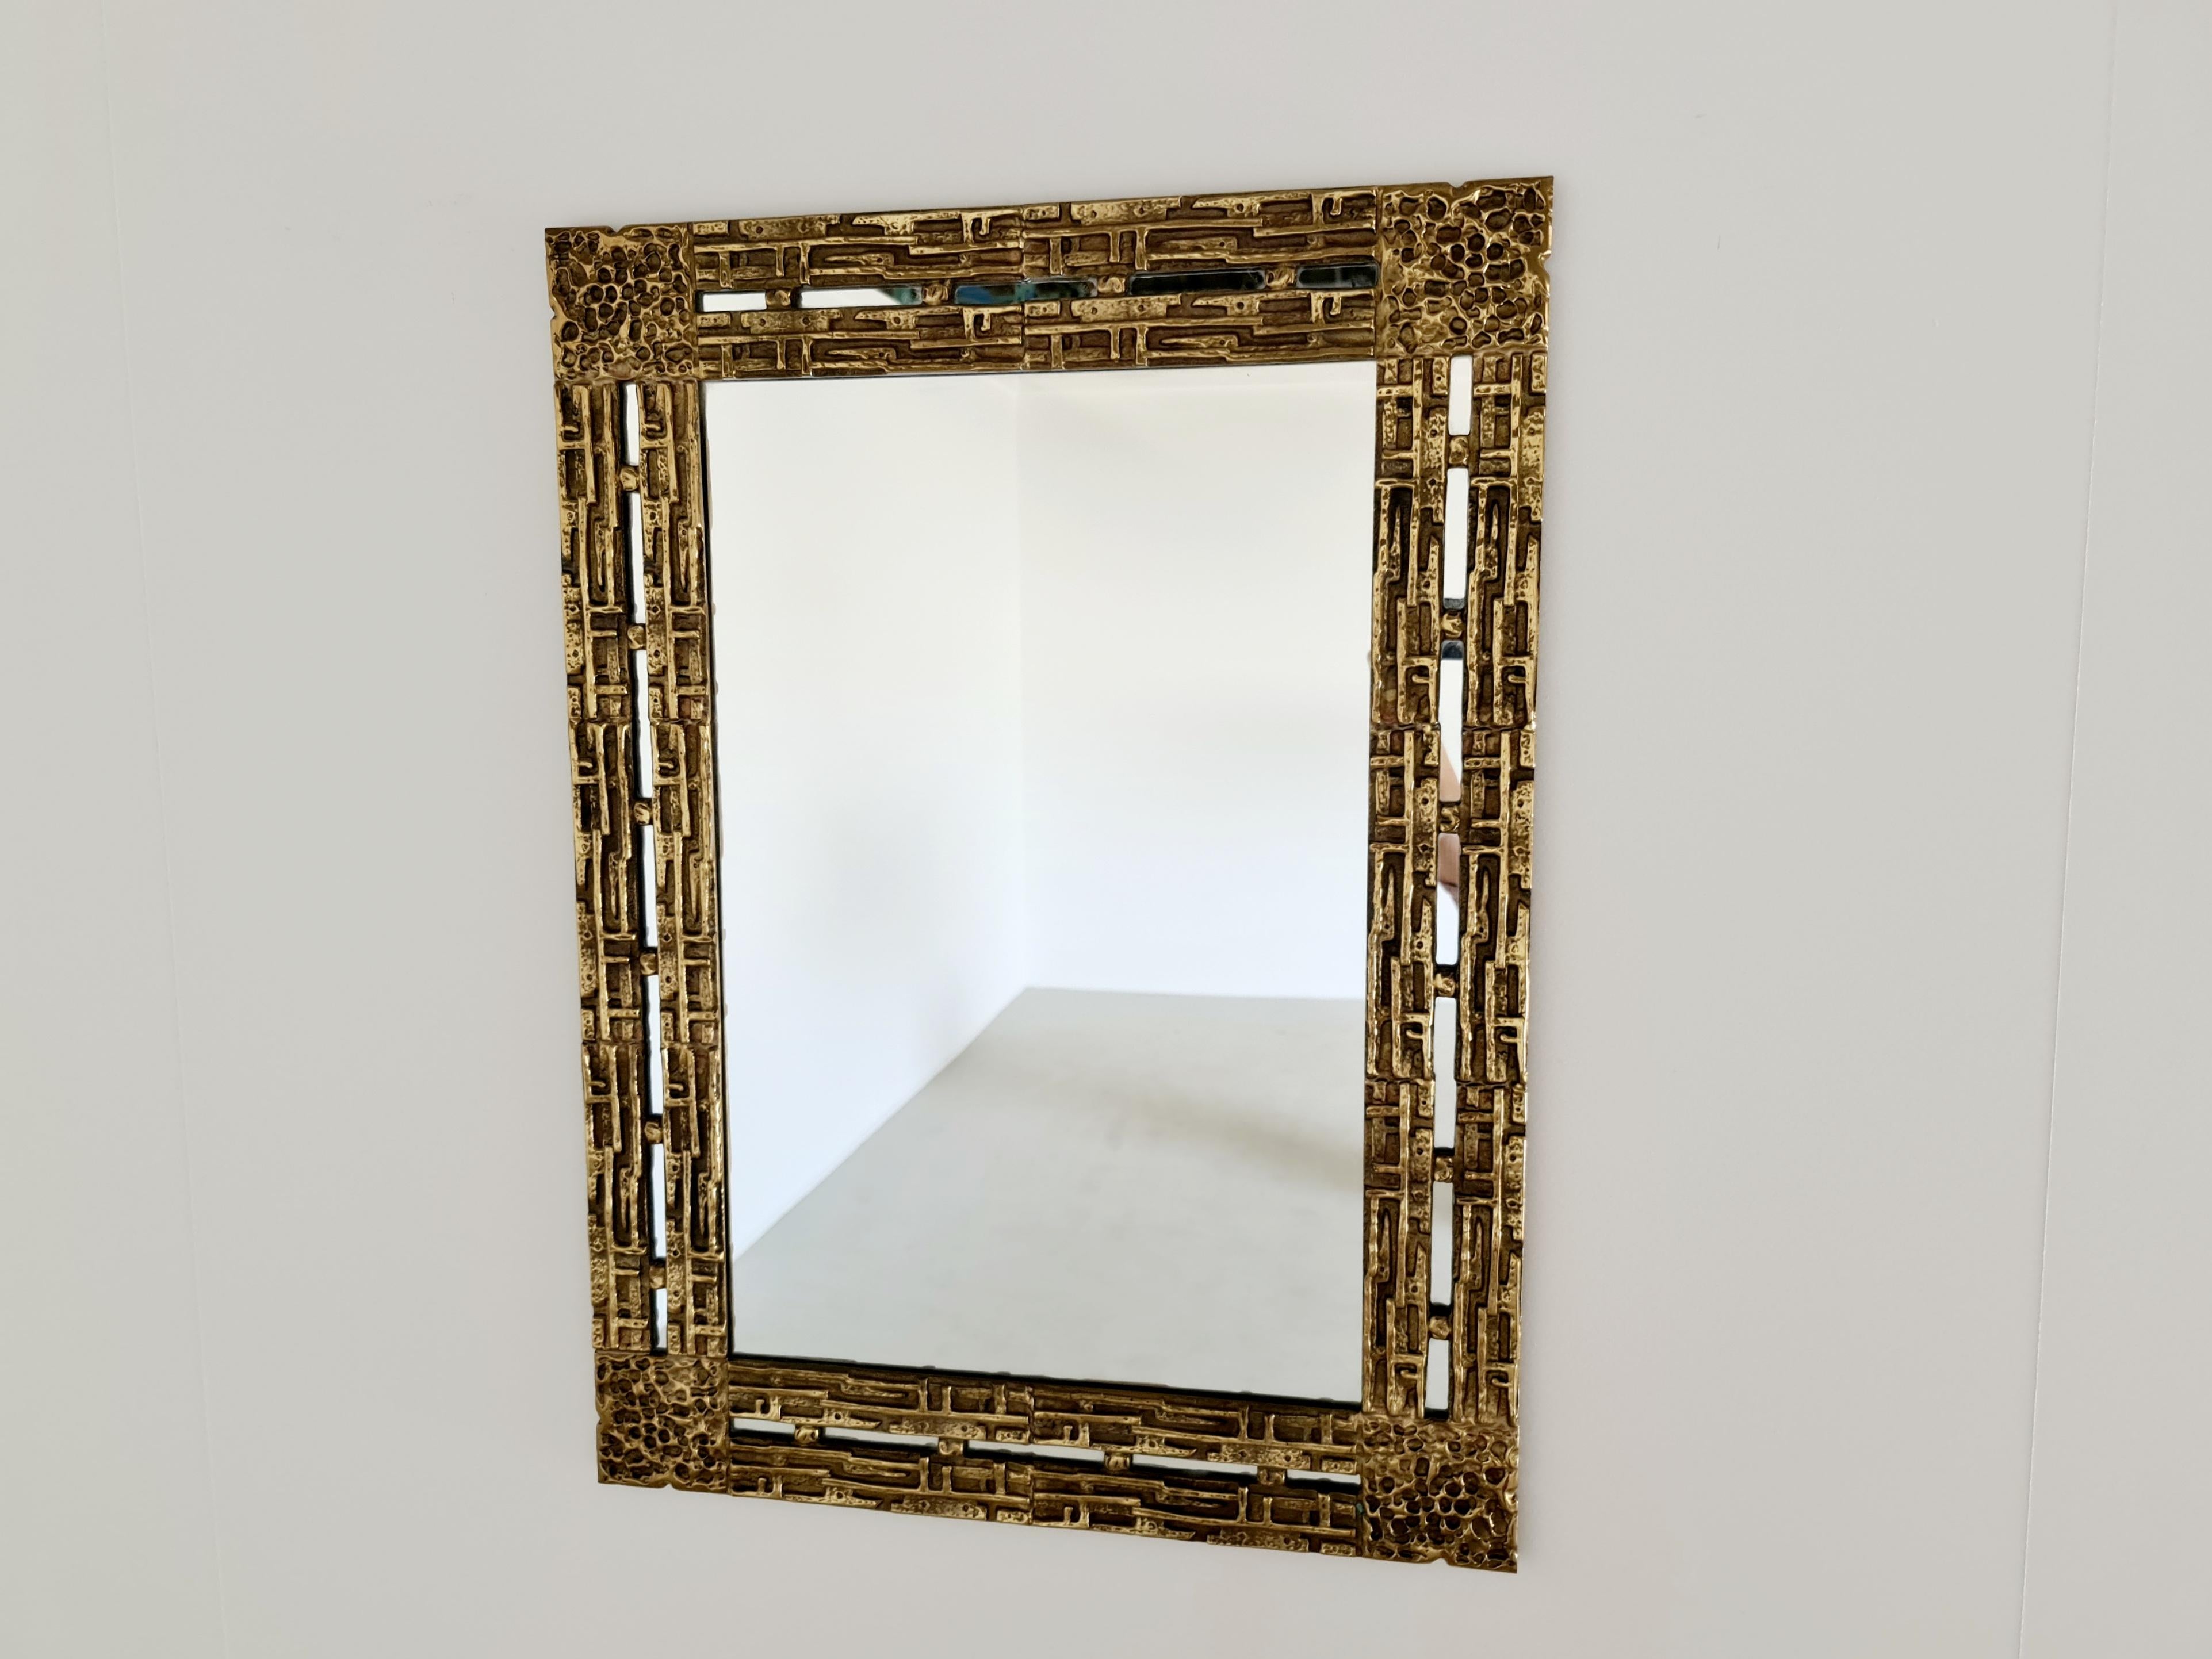 Brutalist wall mirror by Luciano Frigerio featuring a frame in cast bronze. This is model Desiree.
Luciano Frigerio is an Italian designer well active in the 1960s-70s. He designed elegant furniture in a brutalist chic style. The design is